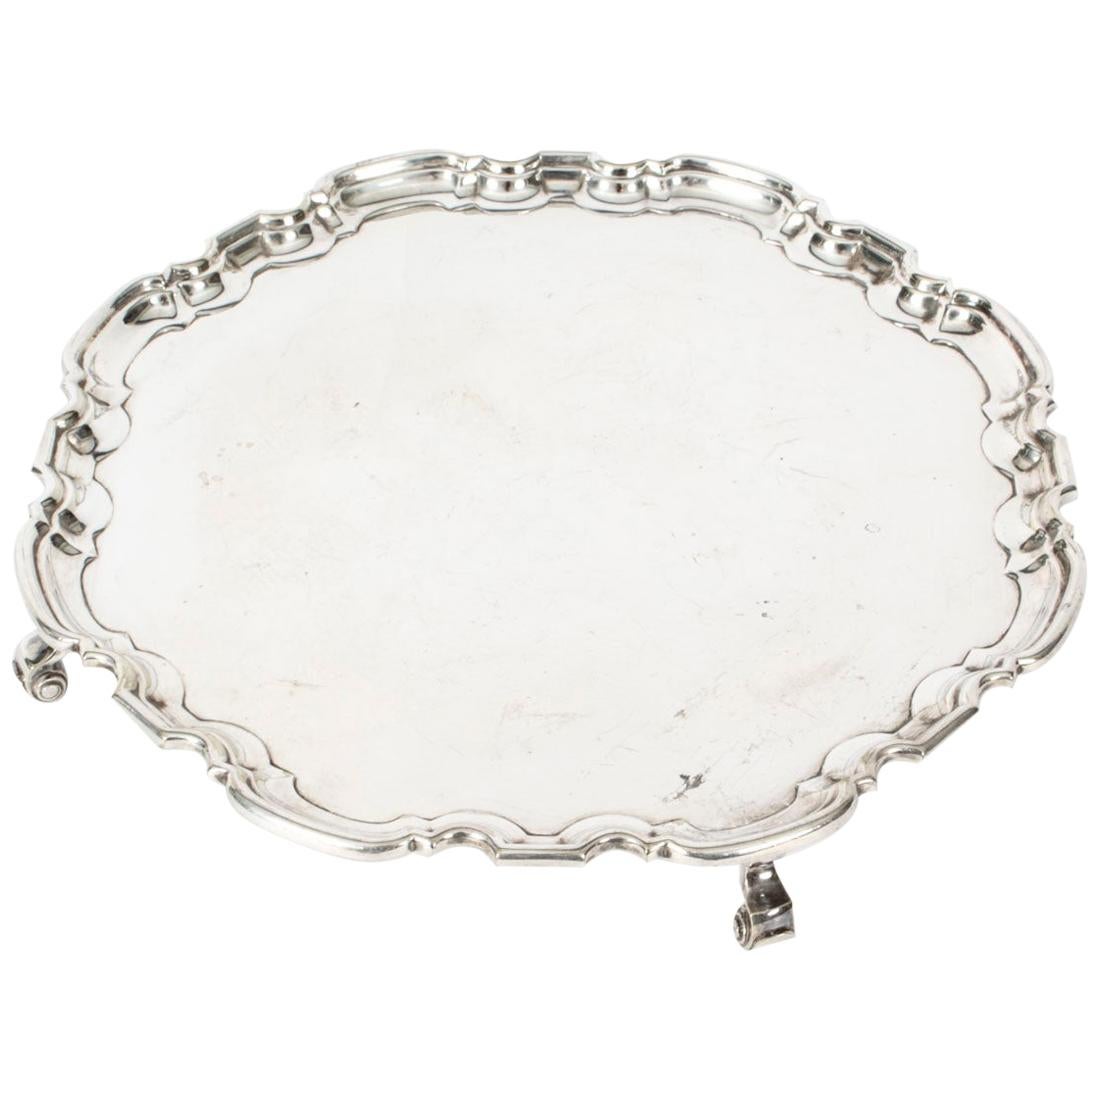 Antique Silver Plated Salver by Maple & Co, 19th Century